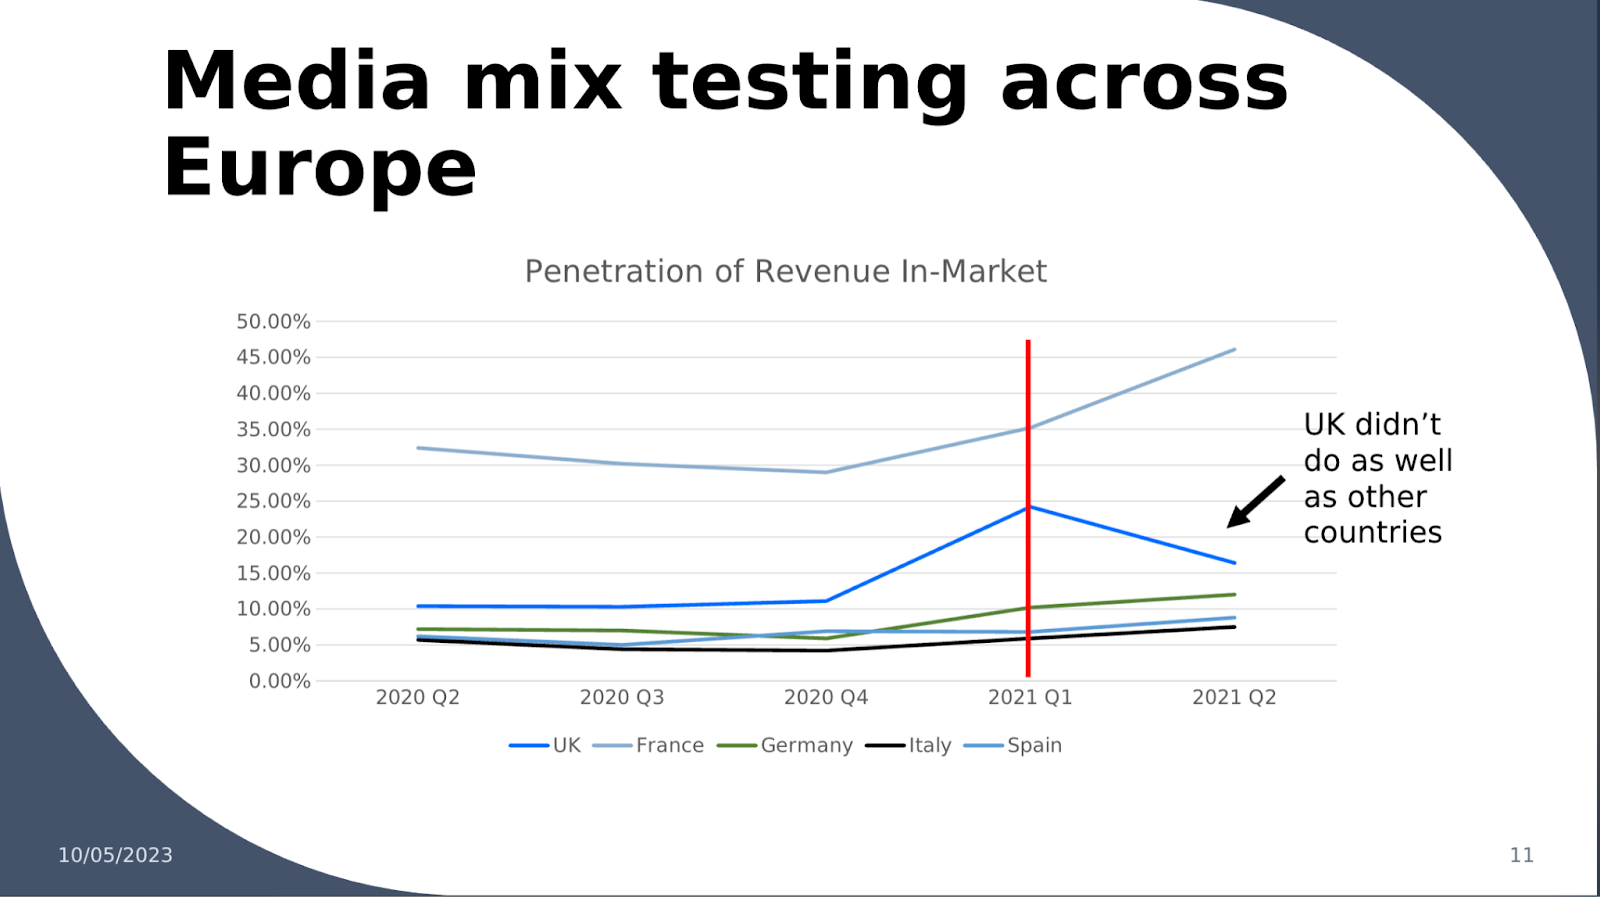 Media mix testing across APJ - a table that is the penetration of revenue in-market across UK, France, Germany, Italy, and Spain. France is significantly higher and reaches a steep incline from Q1 of 2021. And while the other countries do continue to increase, the UK drops and there is a note to say "UK didn't do as well as other countries".  